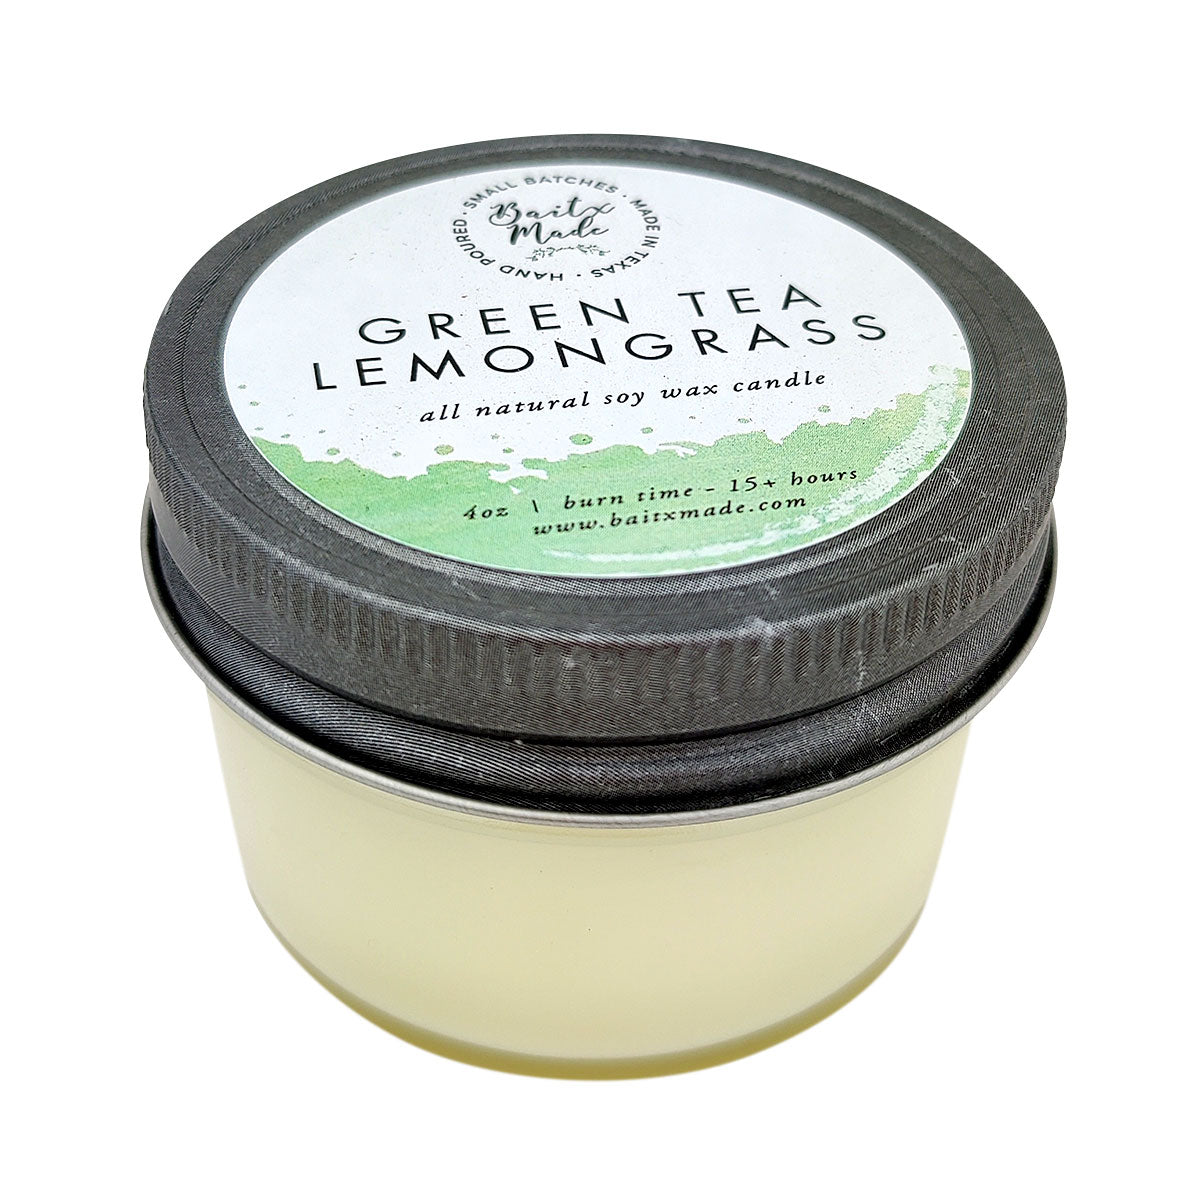 Green Tea and Lemongrass Candle for sale, All Natural Soy Candle 4oz, Soy Candle Lemongrass, Soy Candle Gift, Soy Candles Aromatherapy, Handmade Candles, Soy Candle